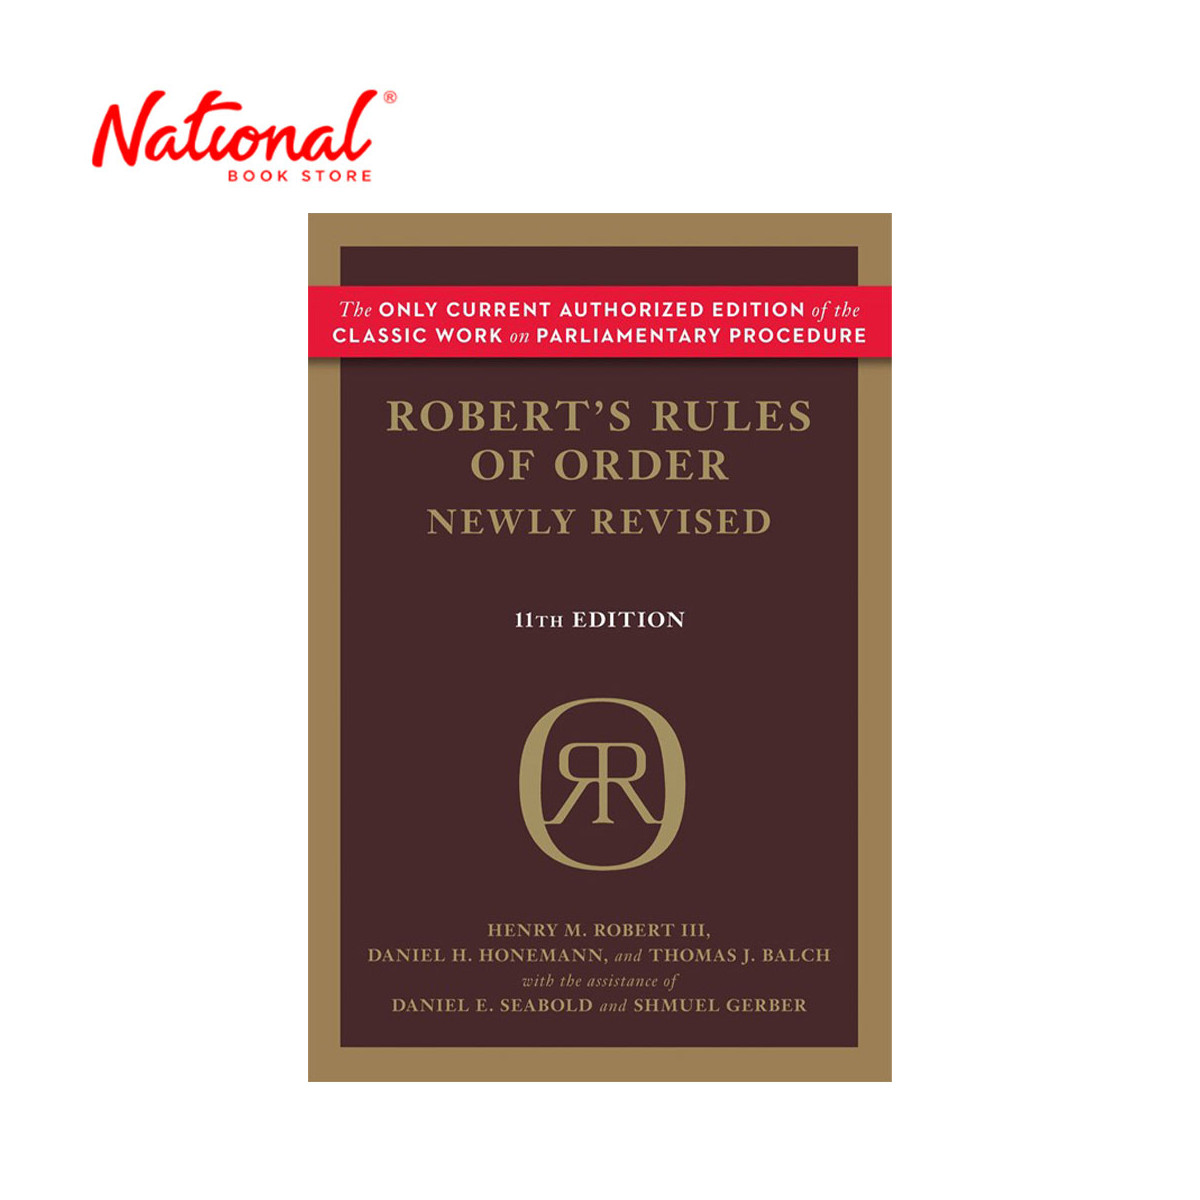 Robert's Rules Of Order Newly Revised, 11th Edition by Henry Robert III - Trade Paperback - Non-Fiction